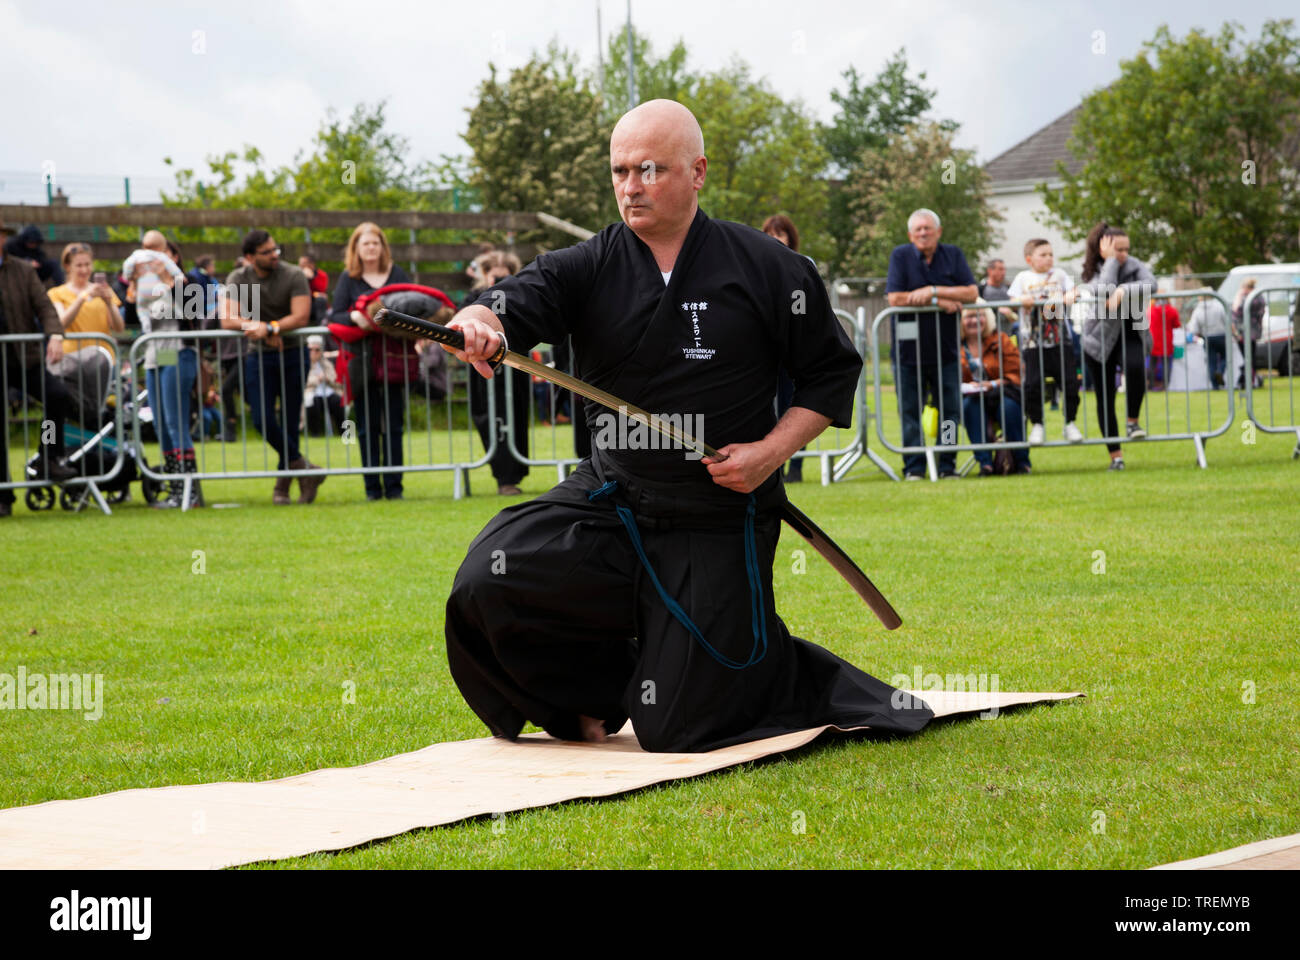 Demonstration of samurai martial art with a sword at Helensburgh and Lomond Highland Games, Argyll, Scotland Stock Photo